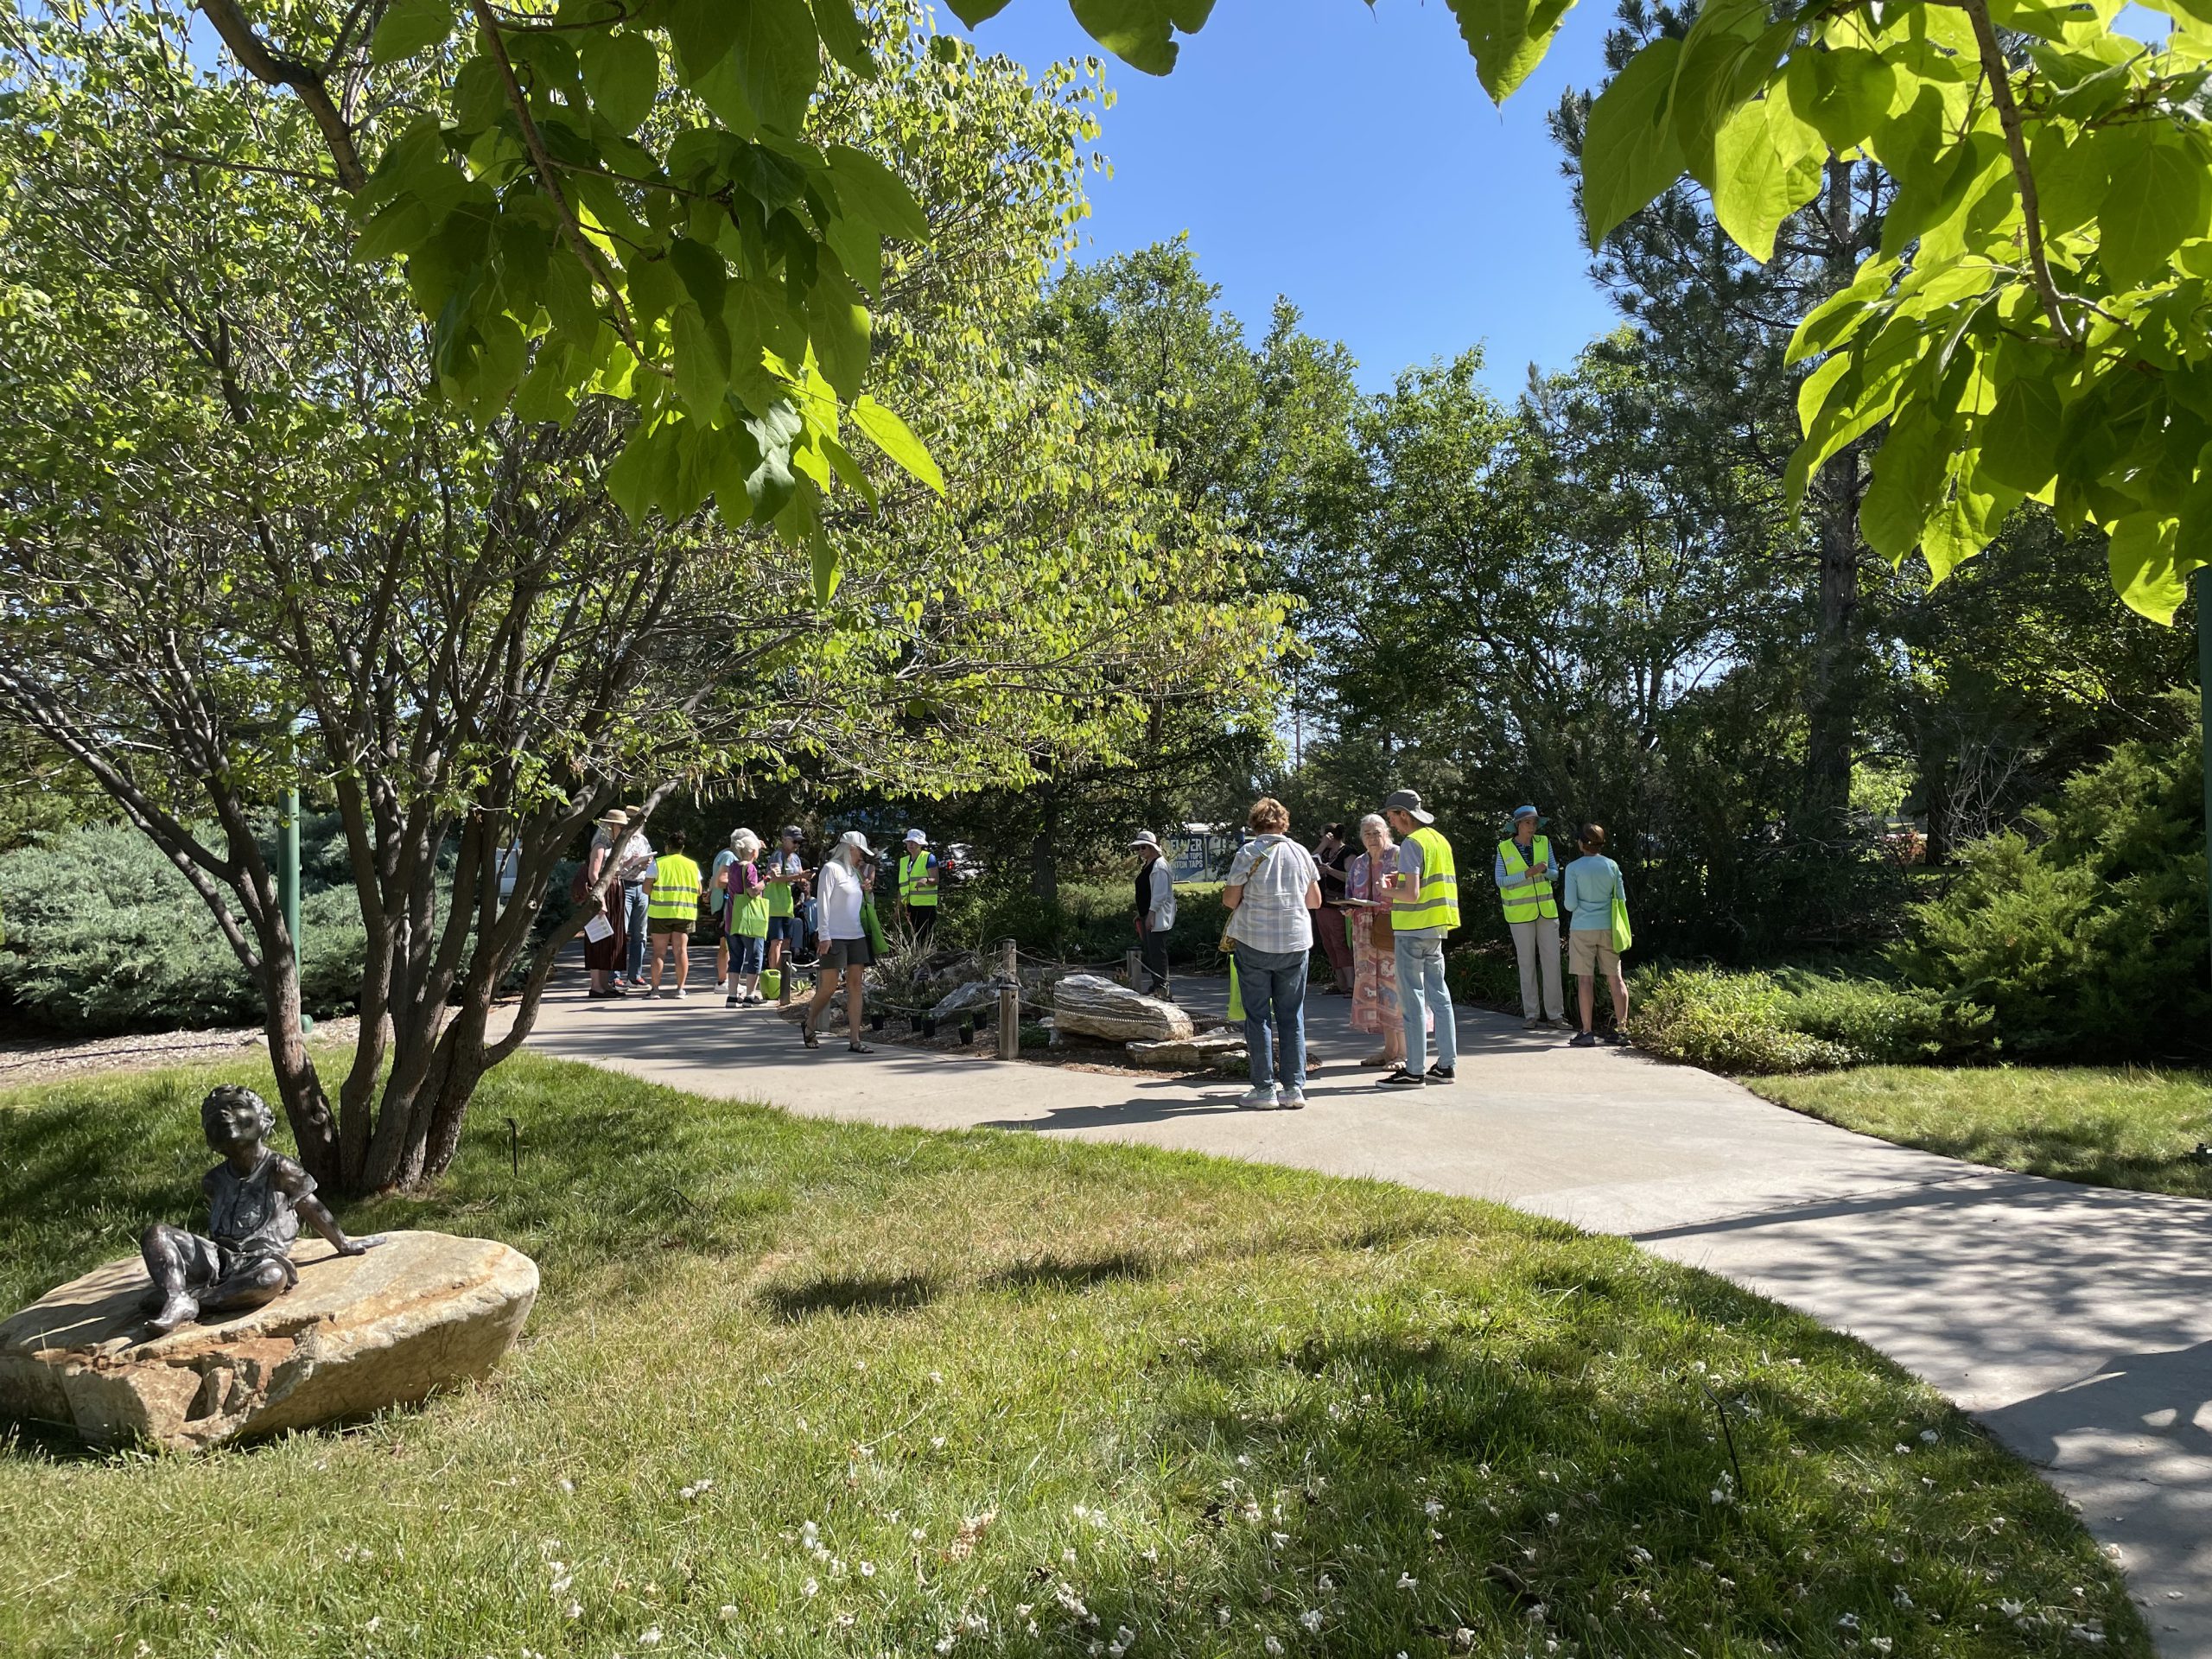 Event attendees stand on a garden pathway surrounded by green trees and grass.